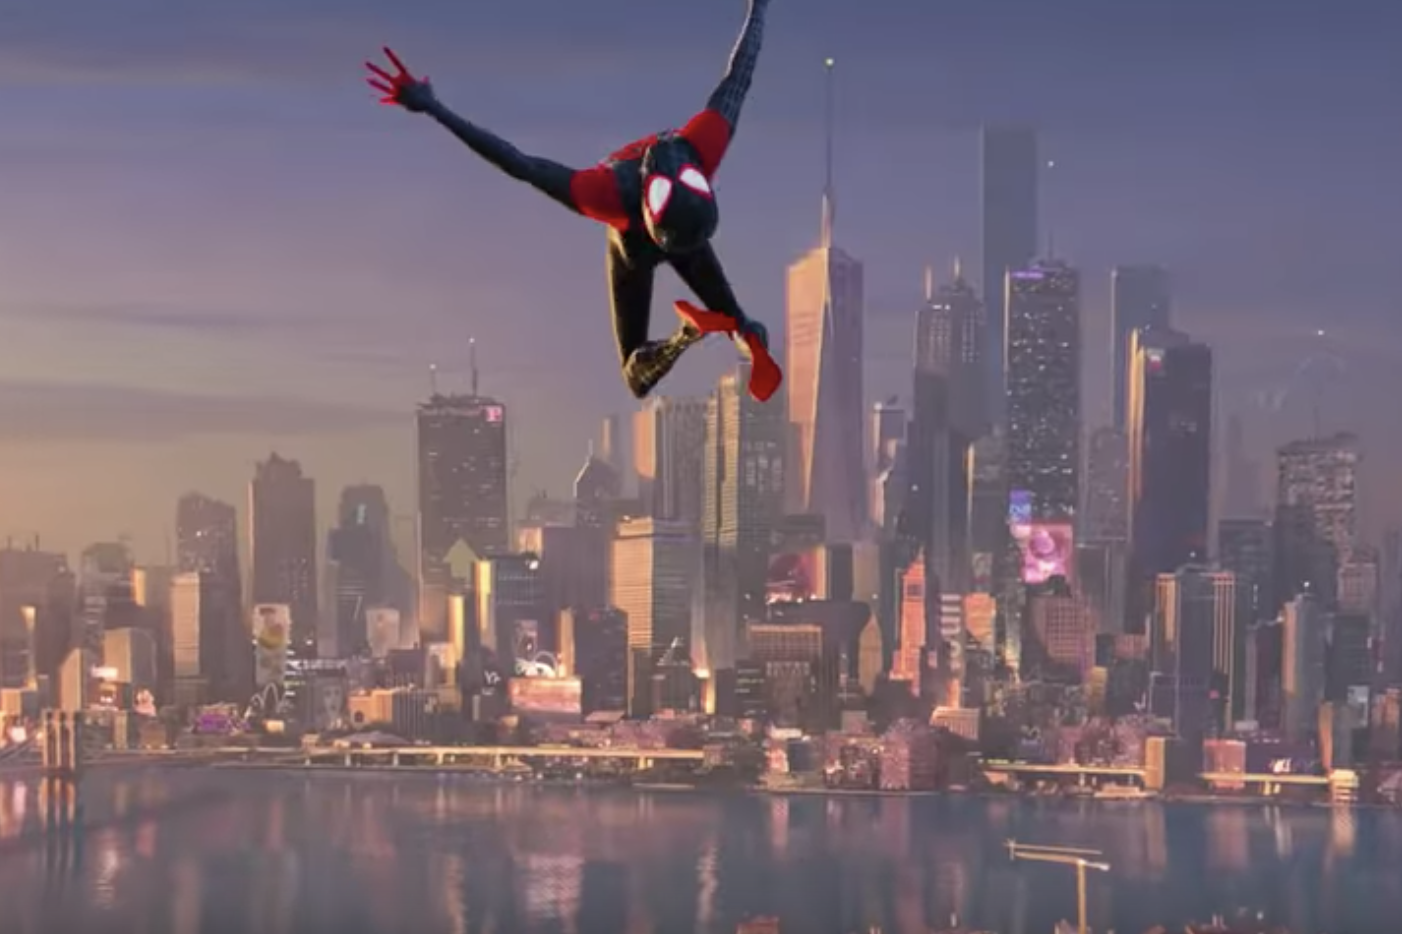 Spider-Man: Into the Spider-Verse soundtrack to feature Vince Staples, Lil  Wayne, Post Malone, Nicki Minaj and more | The Independent | The Independent